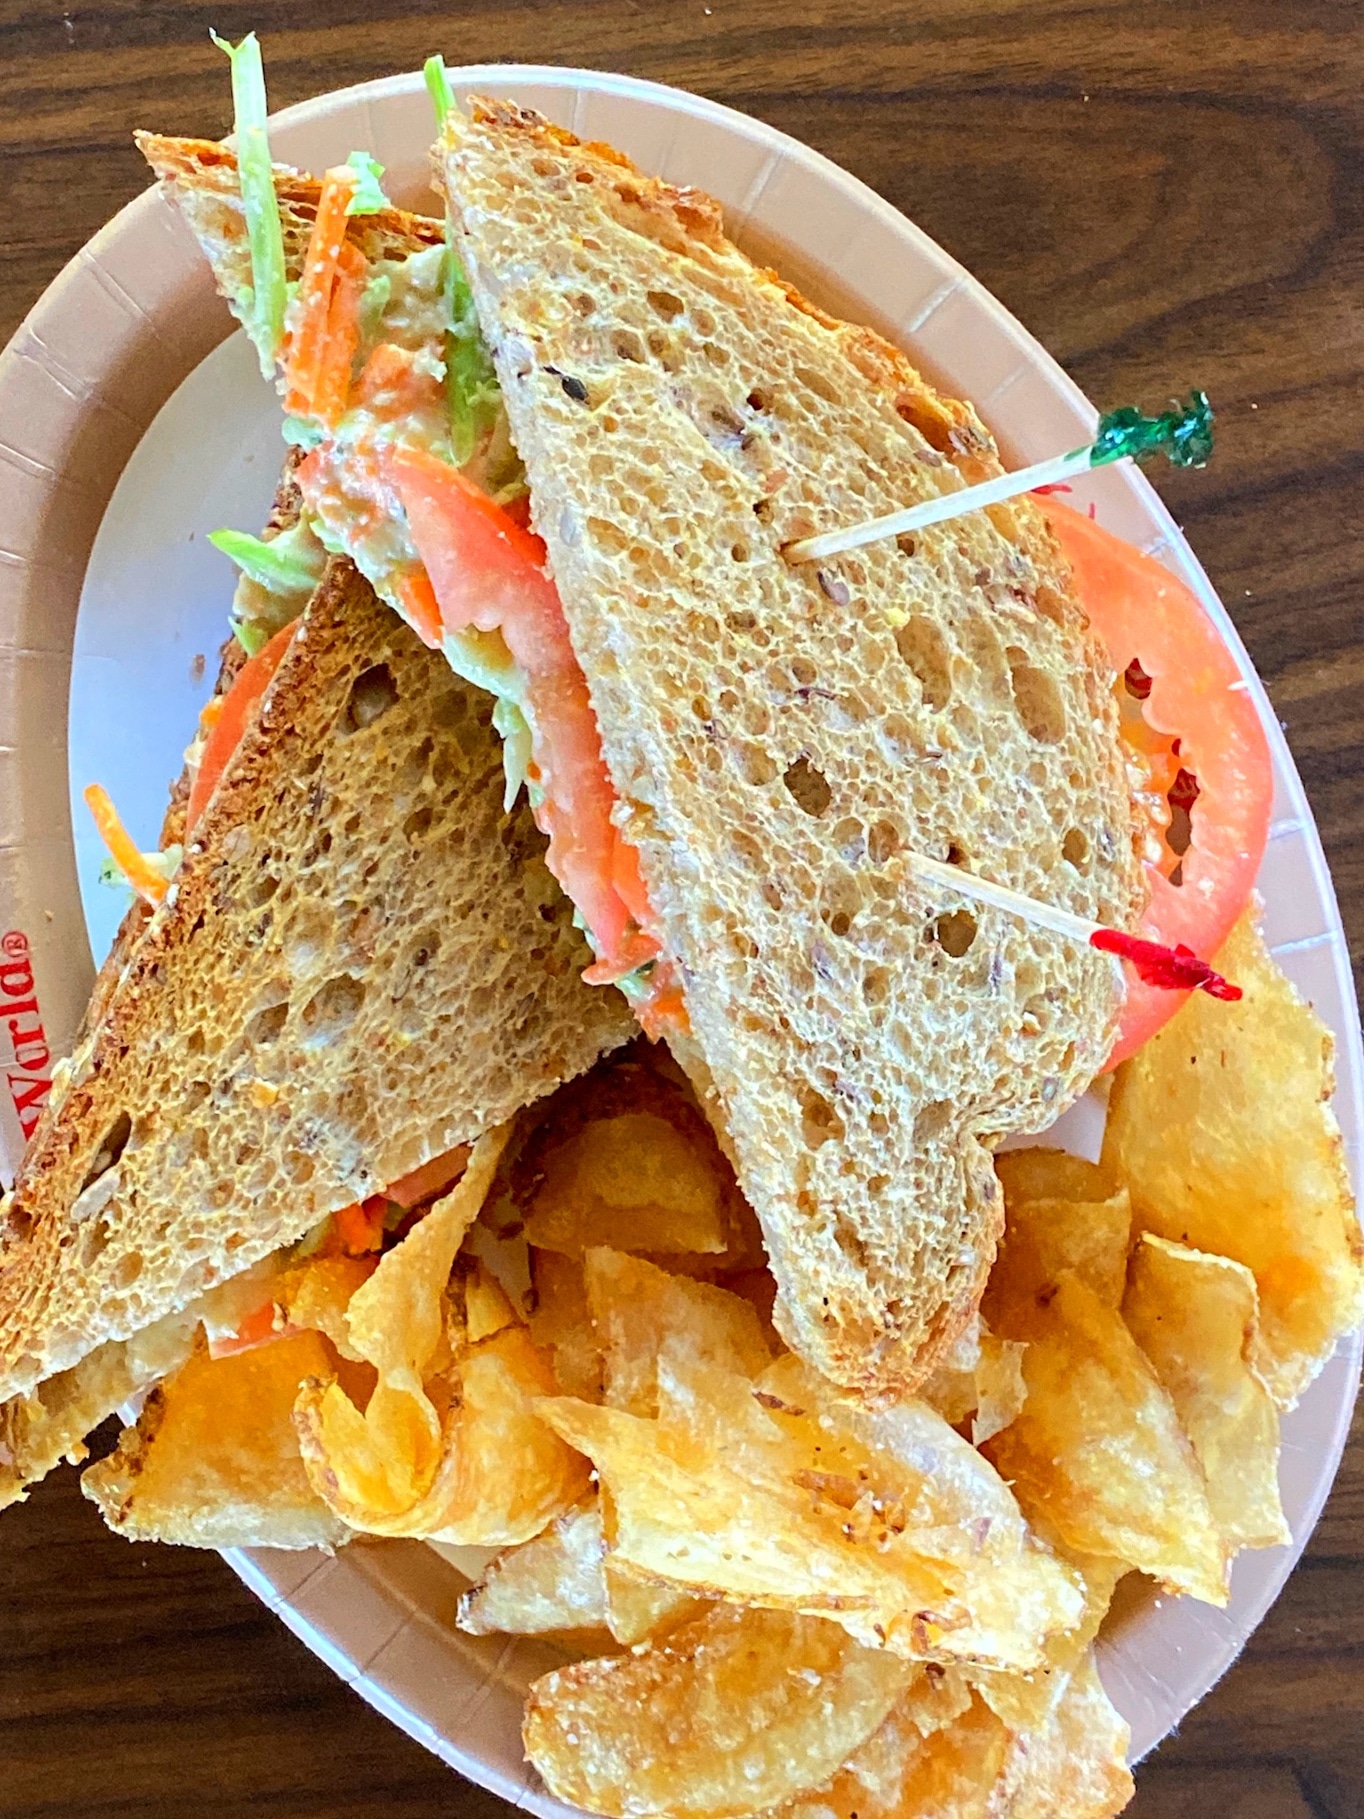 Vegan Lighthouse Sandwich at Columbia Harbour House in the Magic Kingdom at Walt Disney World